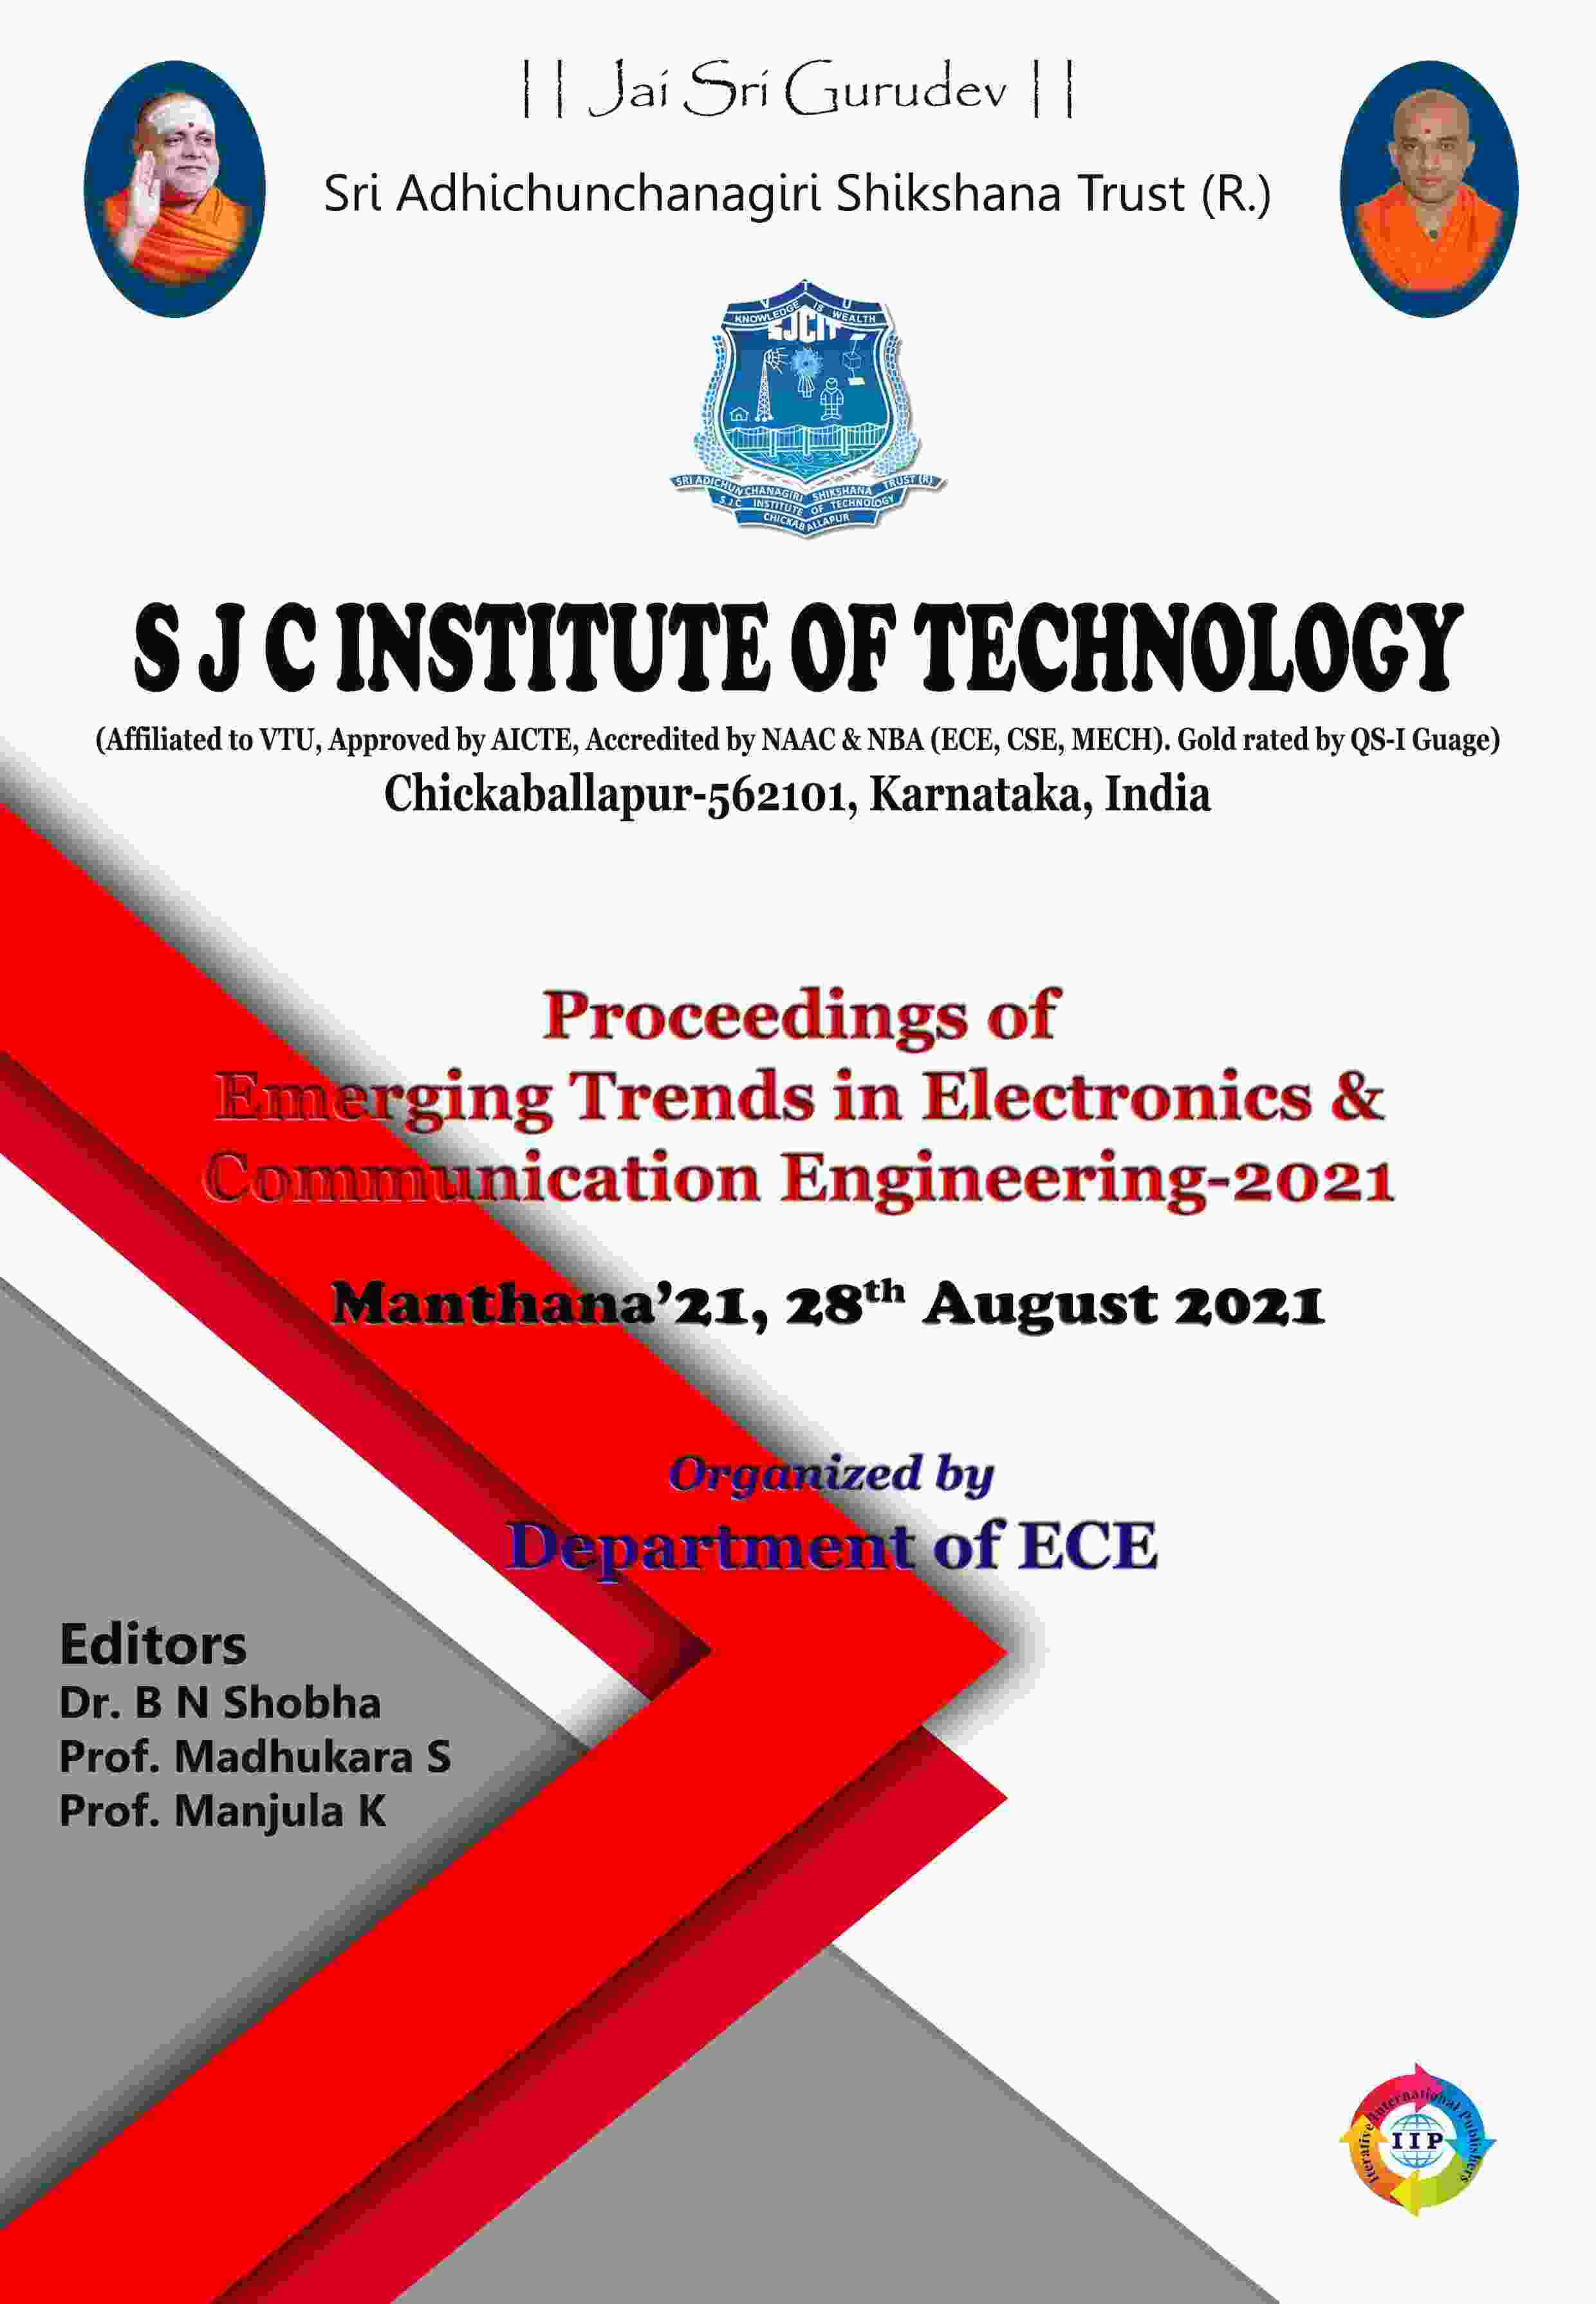 PROCEEDINGS OF EMERGING TRENDS IN ELECTRONICS & COMMUNICATION ENGINEERING-2021